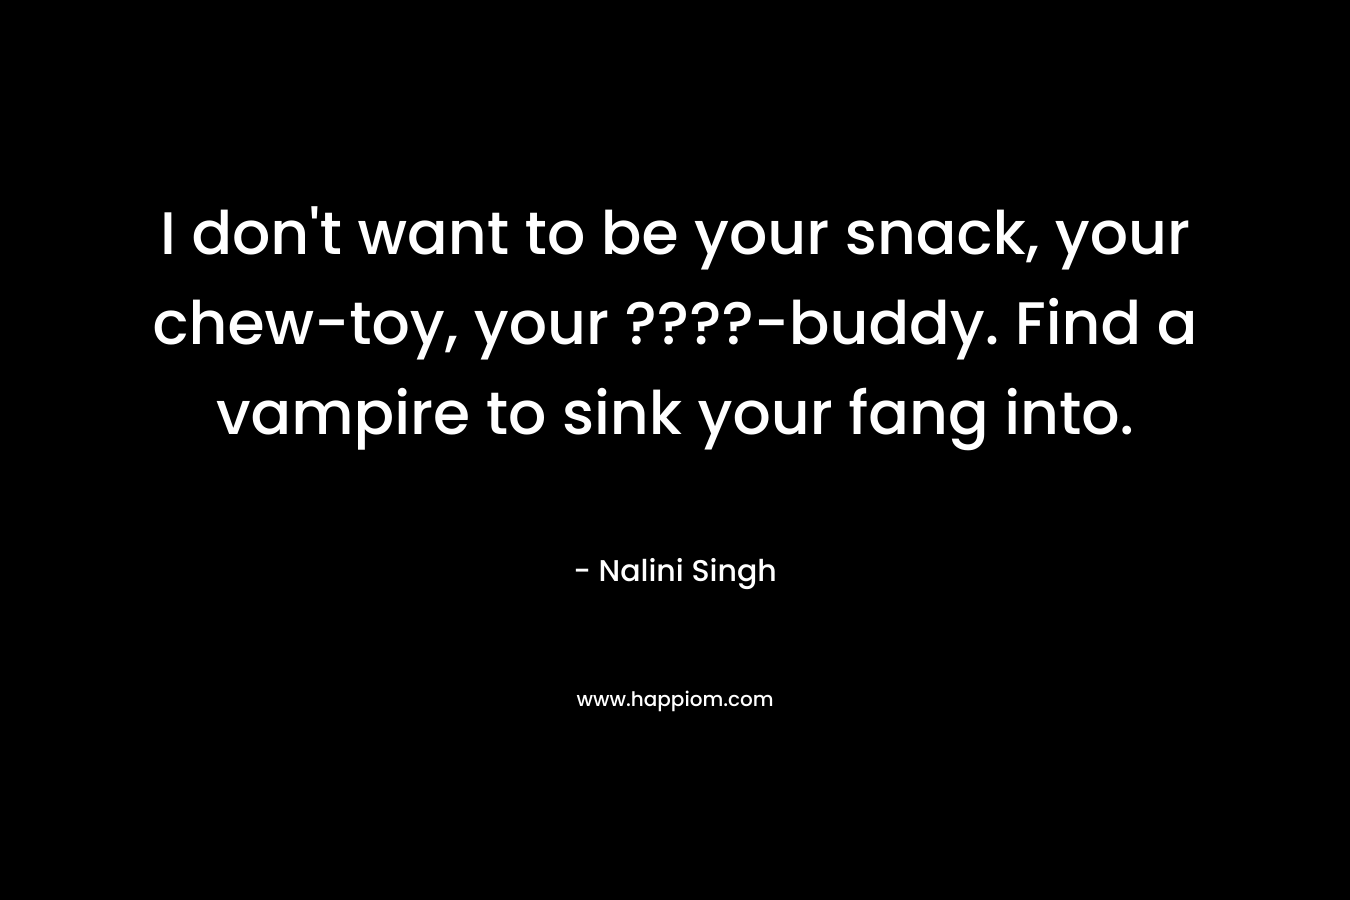 I don't want to be your snack, your chew-toy, your ????-buddy. Find a vampire to sink your fang into.